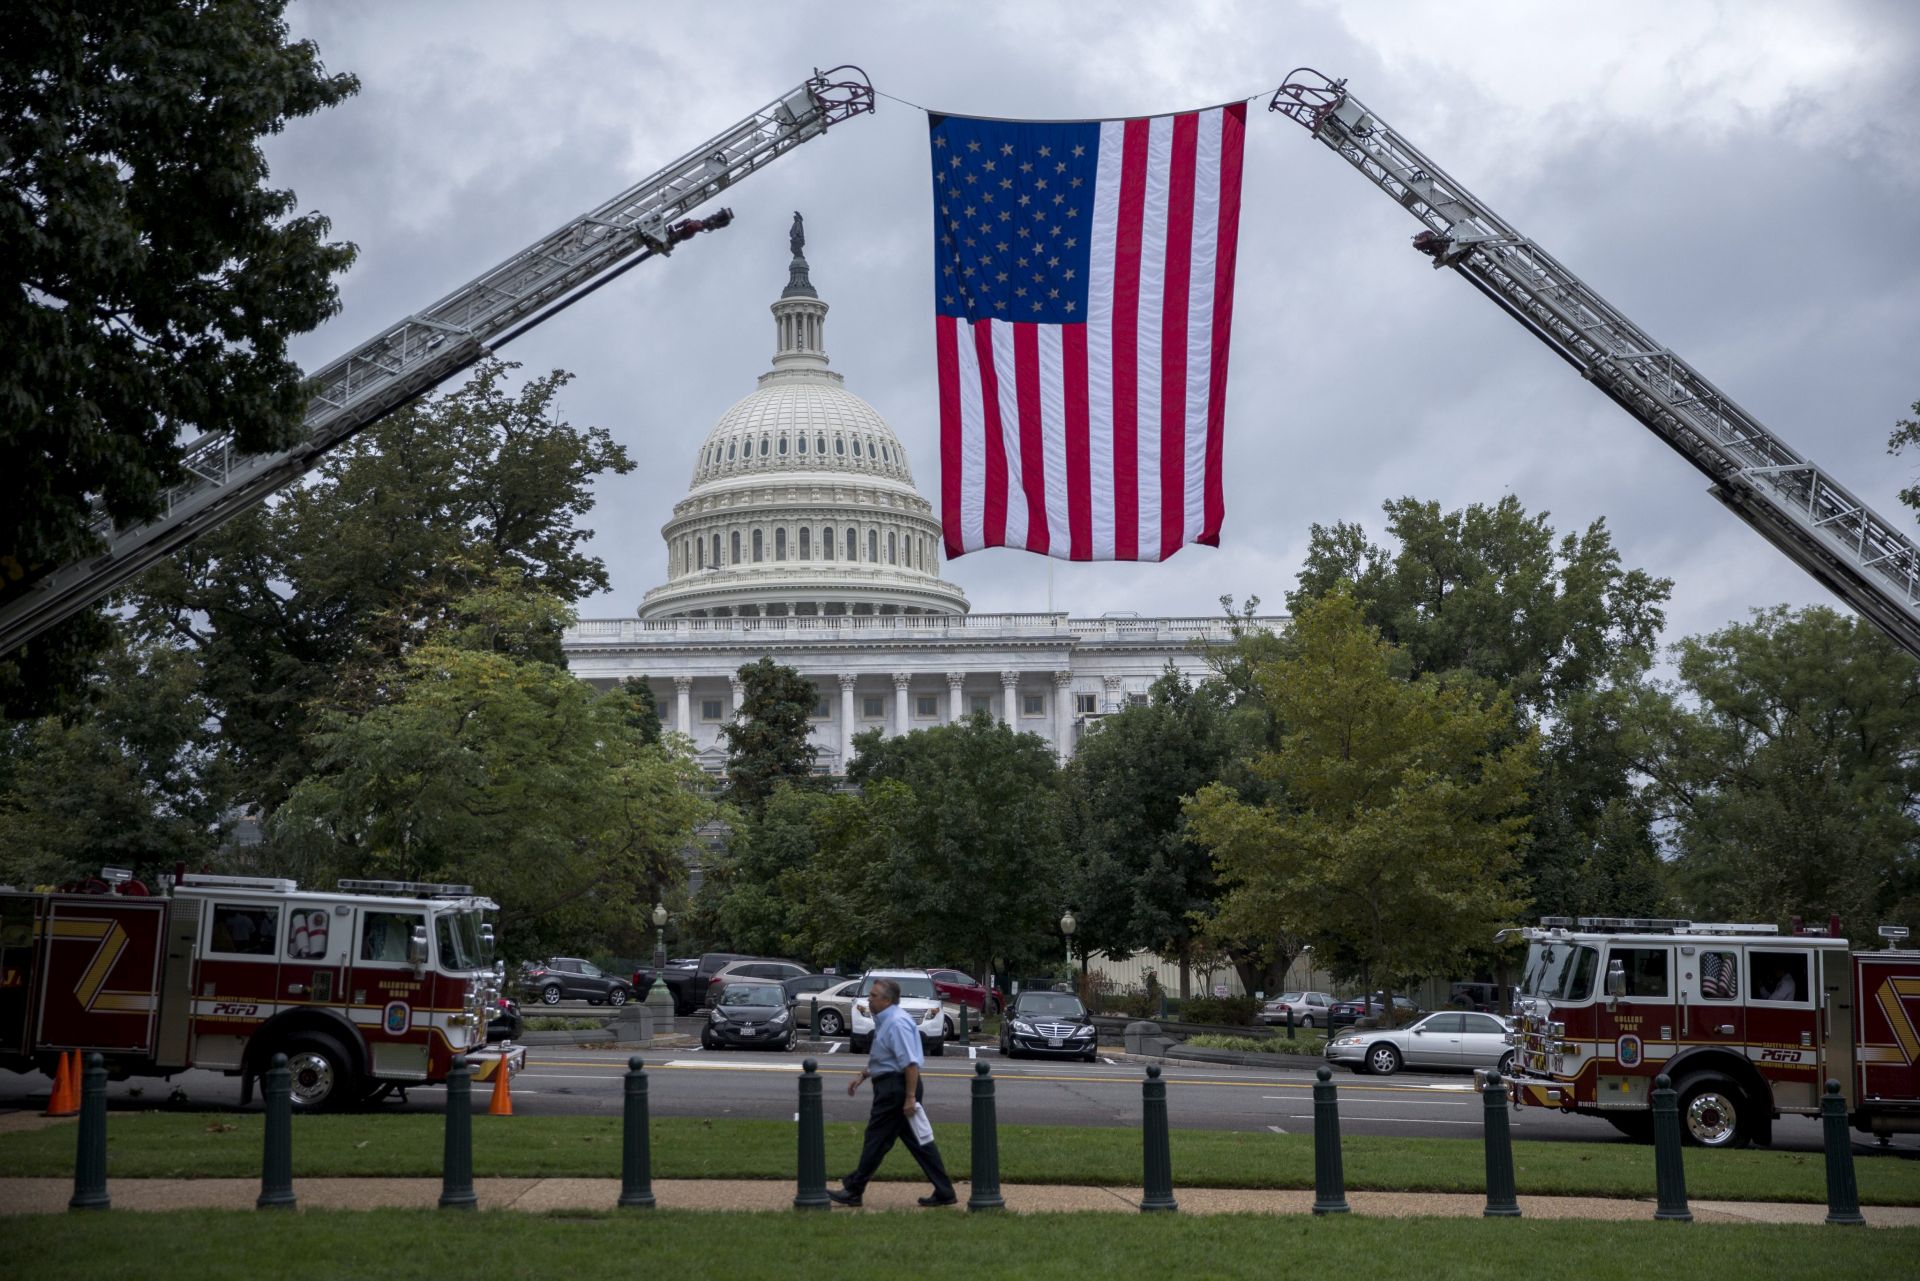 epa05560547 An American flag is suspended from fire department ladder trucks during a successful veto override vote in the Senate at the US Capitol in Washington, DC, USA, 28 September 2016. The Senate voted 97-1 to override President Obama's veto of legislation allowing families of the victims of the 9/11 attacks to sue the government of Saudi Arabia.  EPA/SHAWN THEW